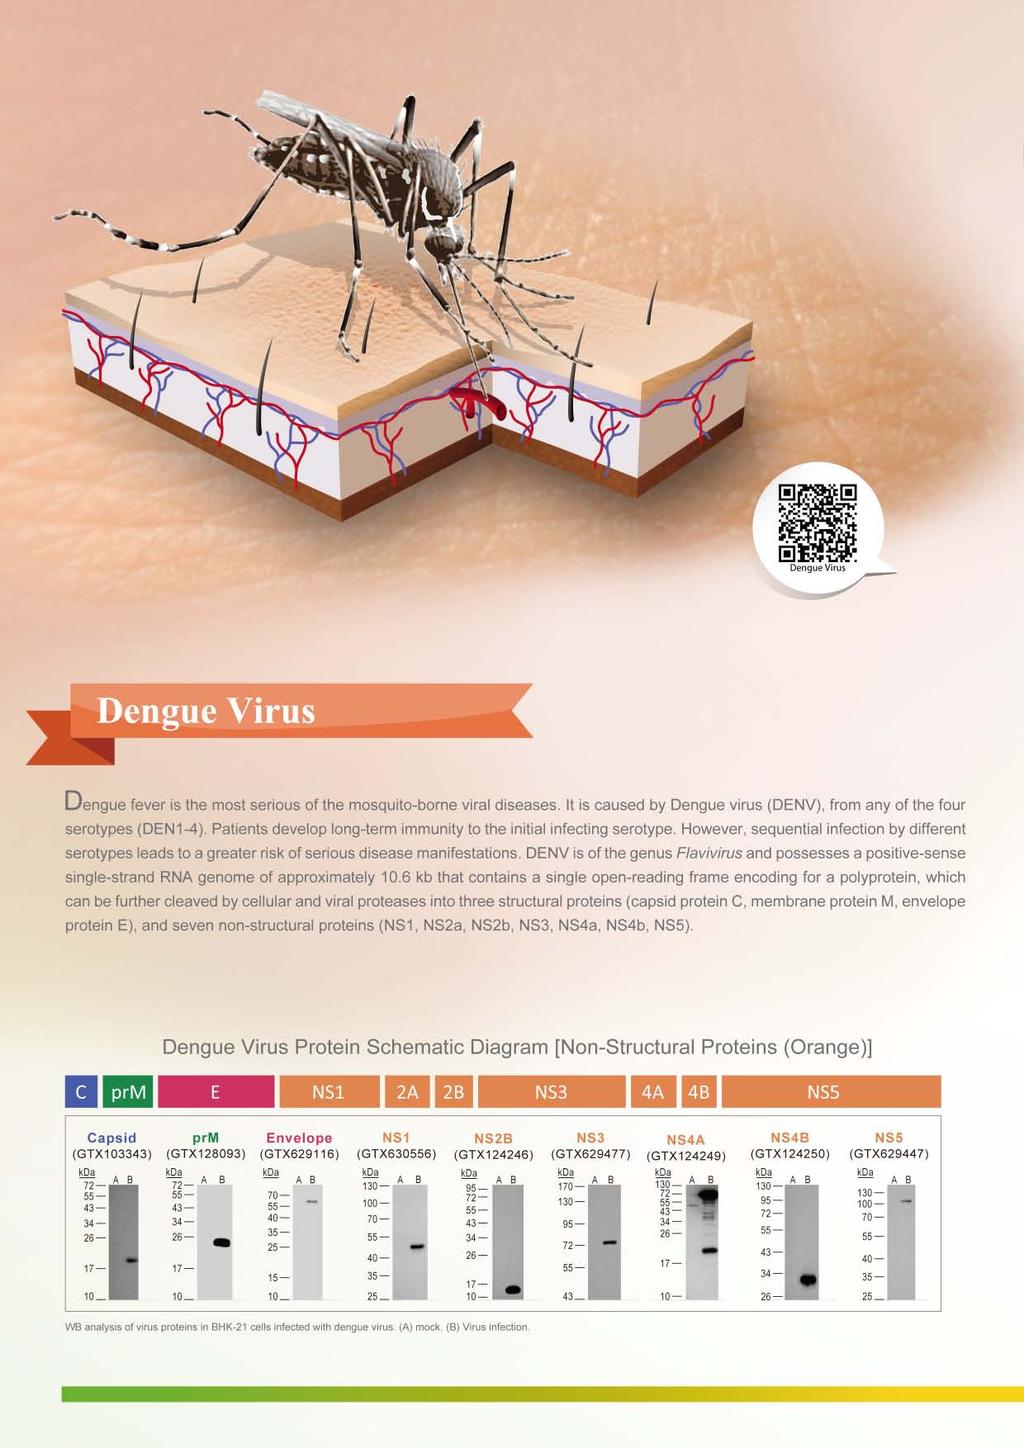 Dengue fever is the most serious of the mosquito-borne viral diseases. t is caused by Dengue virus (DENV), from any of the four serotypes (DEN1-4).